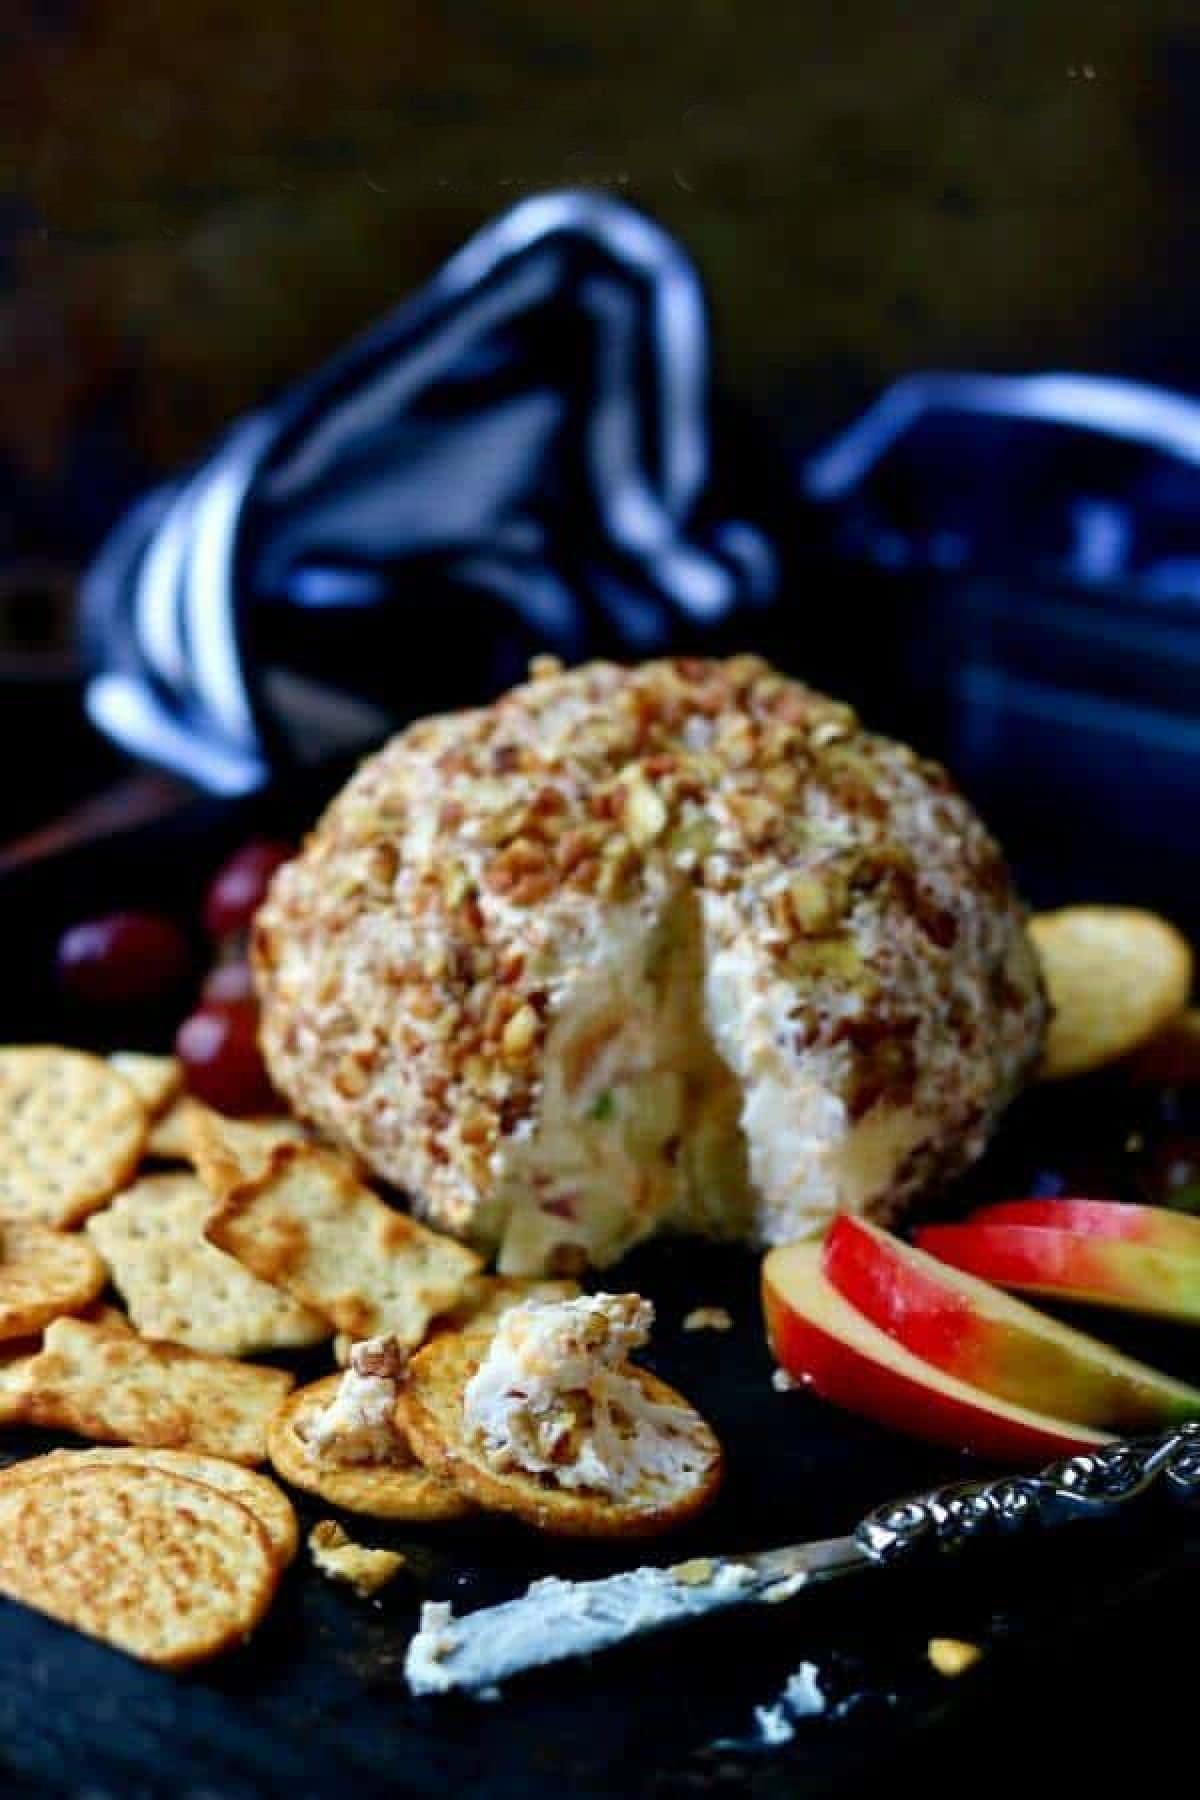 Cheeseball covered in pecans with crackers and apple slices.